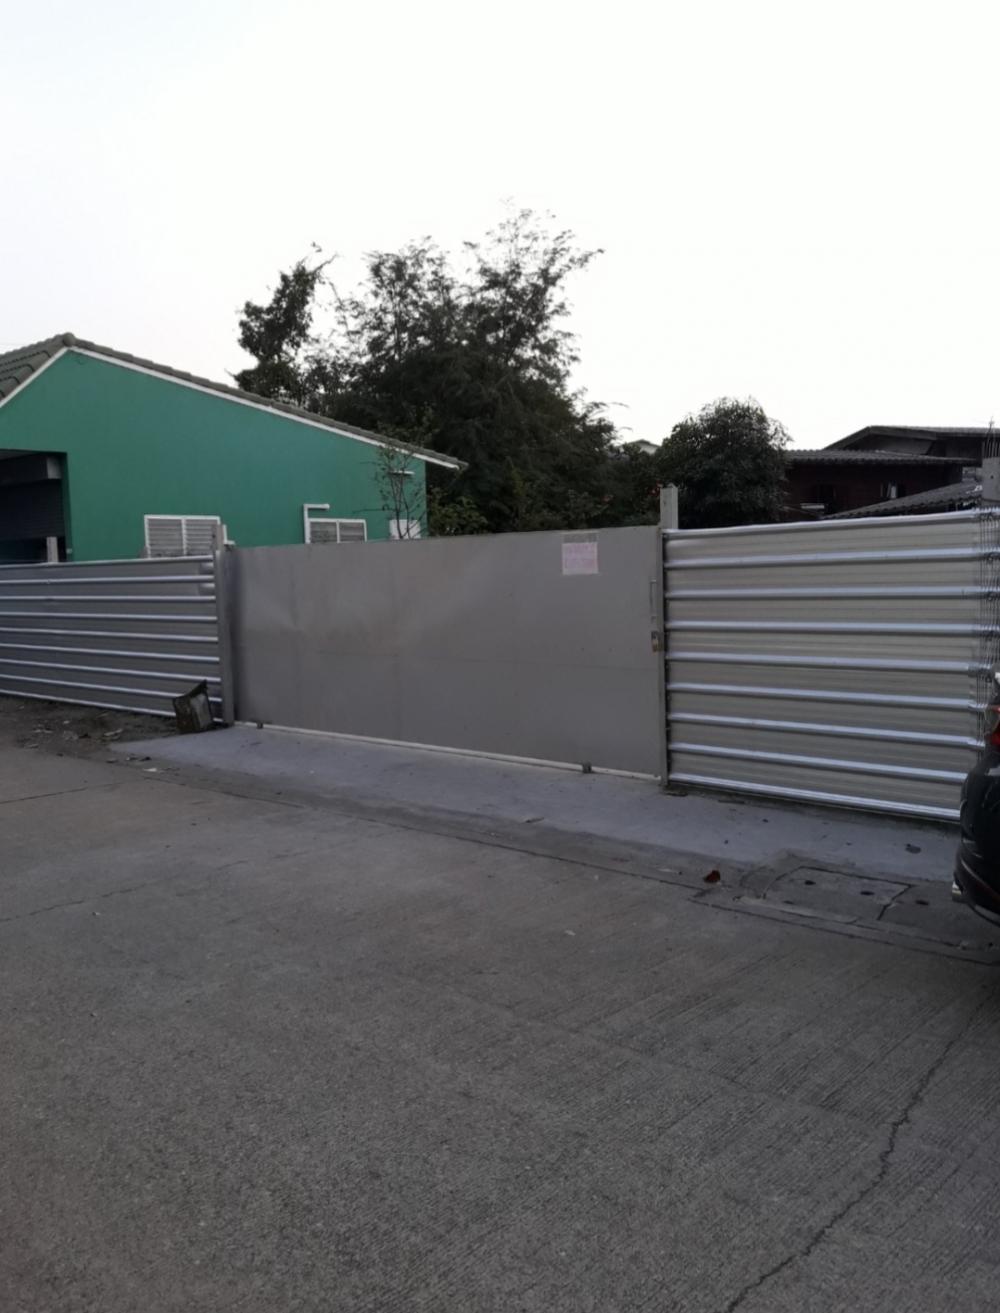 For RentLandBang kae, Phetkasem : 1. For sale / rent Soi Phetkasem 114, Bangkok 1. There is a warehouse, land 73 sq m., fenced as in the picture, already filled in high land, rent 18,000.-/month. Selling for 4,800,000.- (seller pays transfer fee) If interested, call to discuss 2. Land 200